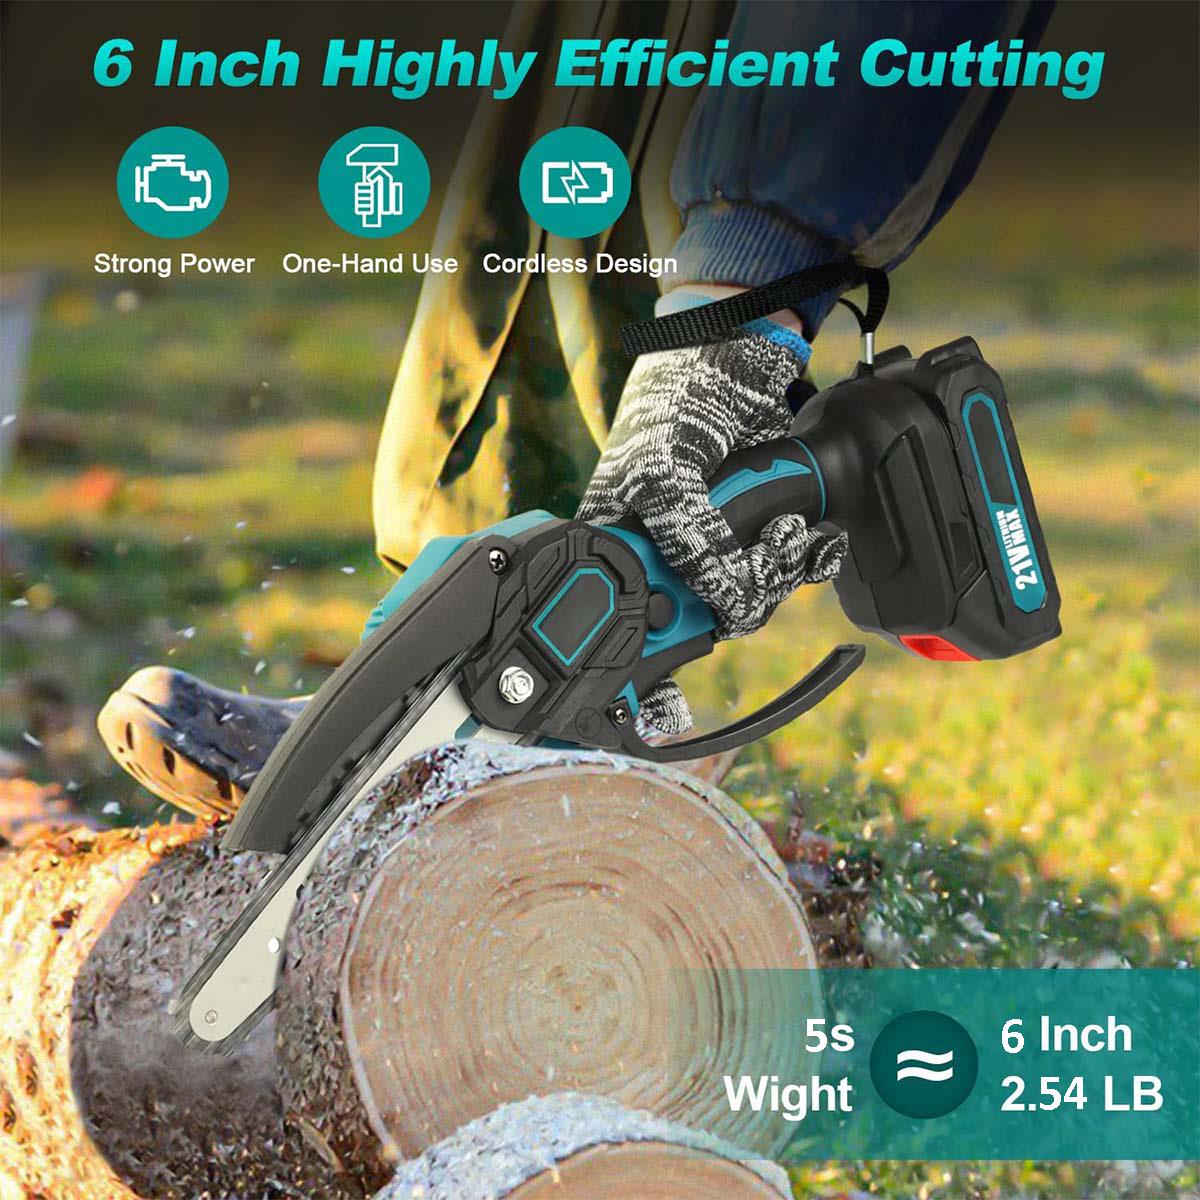 Mini Chainsaw Cordless, Best Mini Chain Saw Cordless 6 Inch With